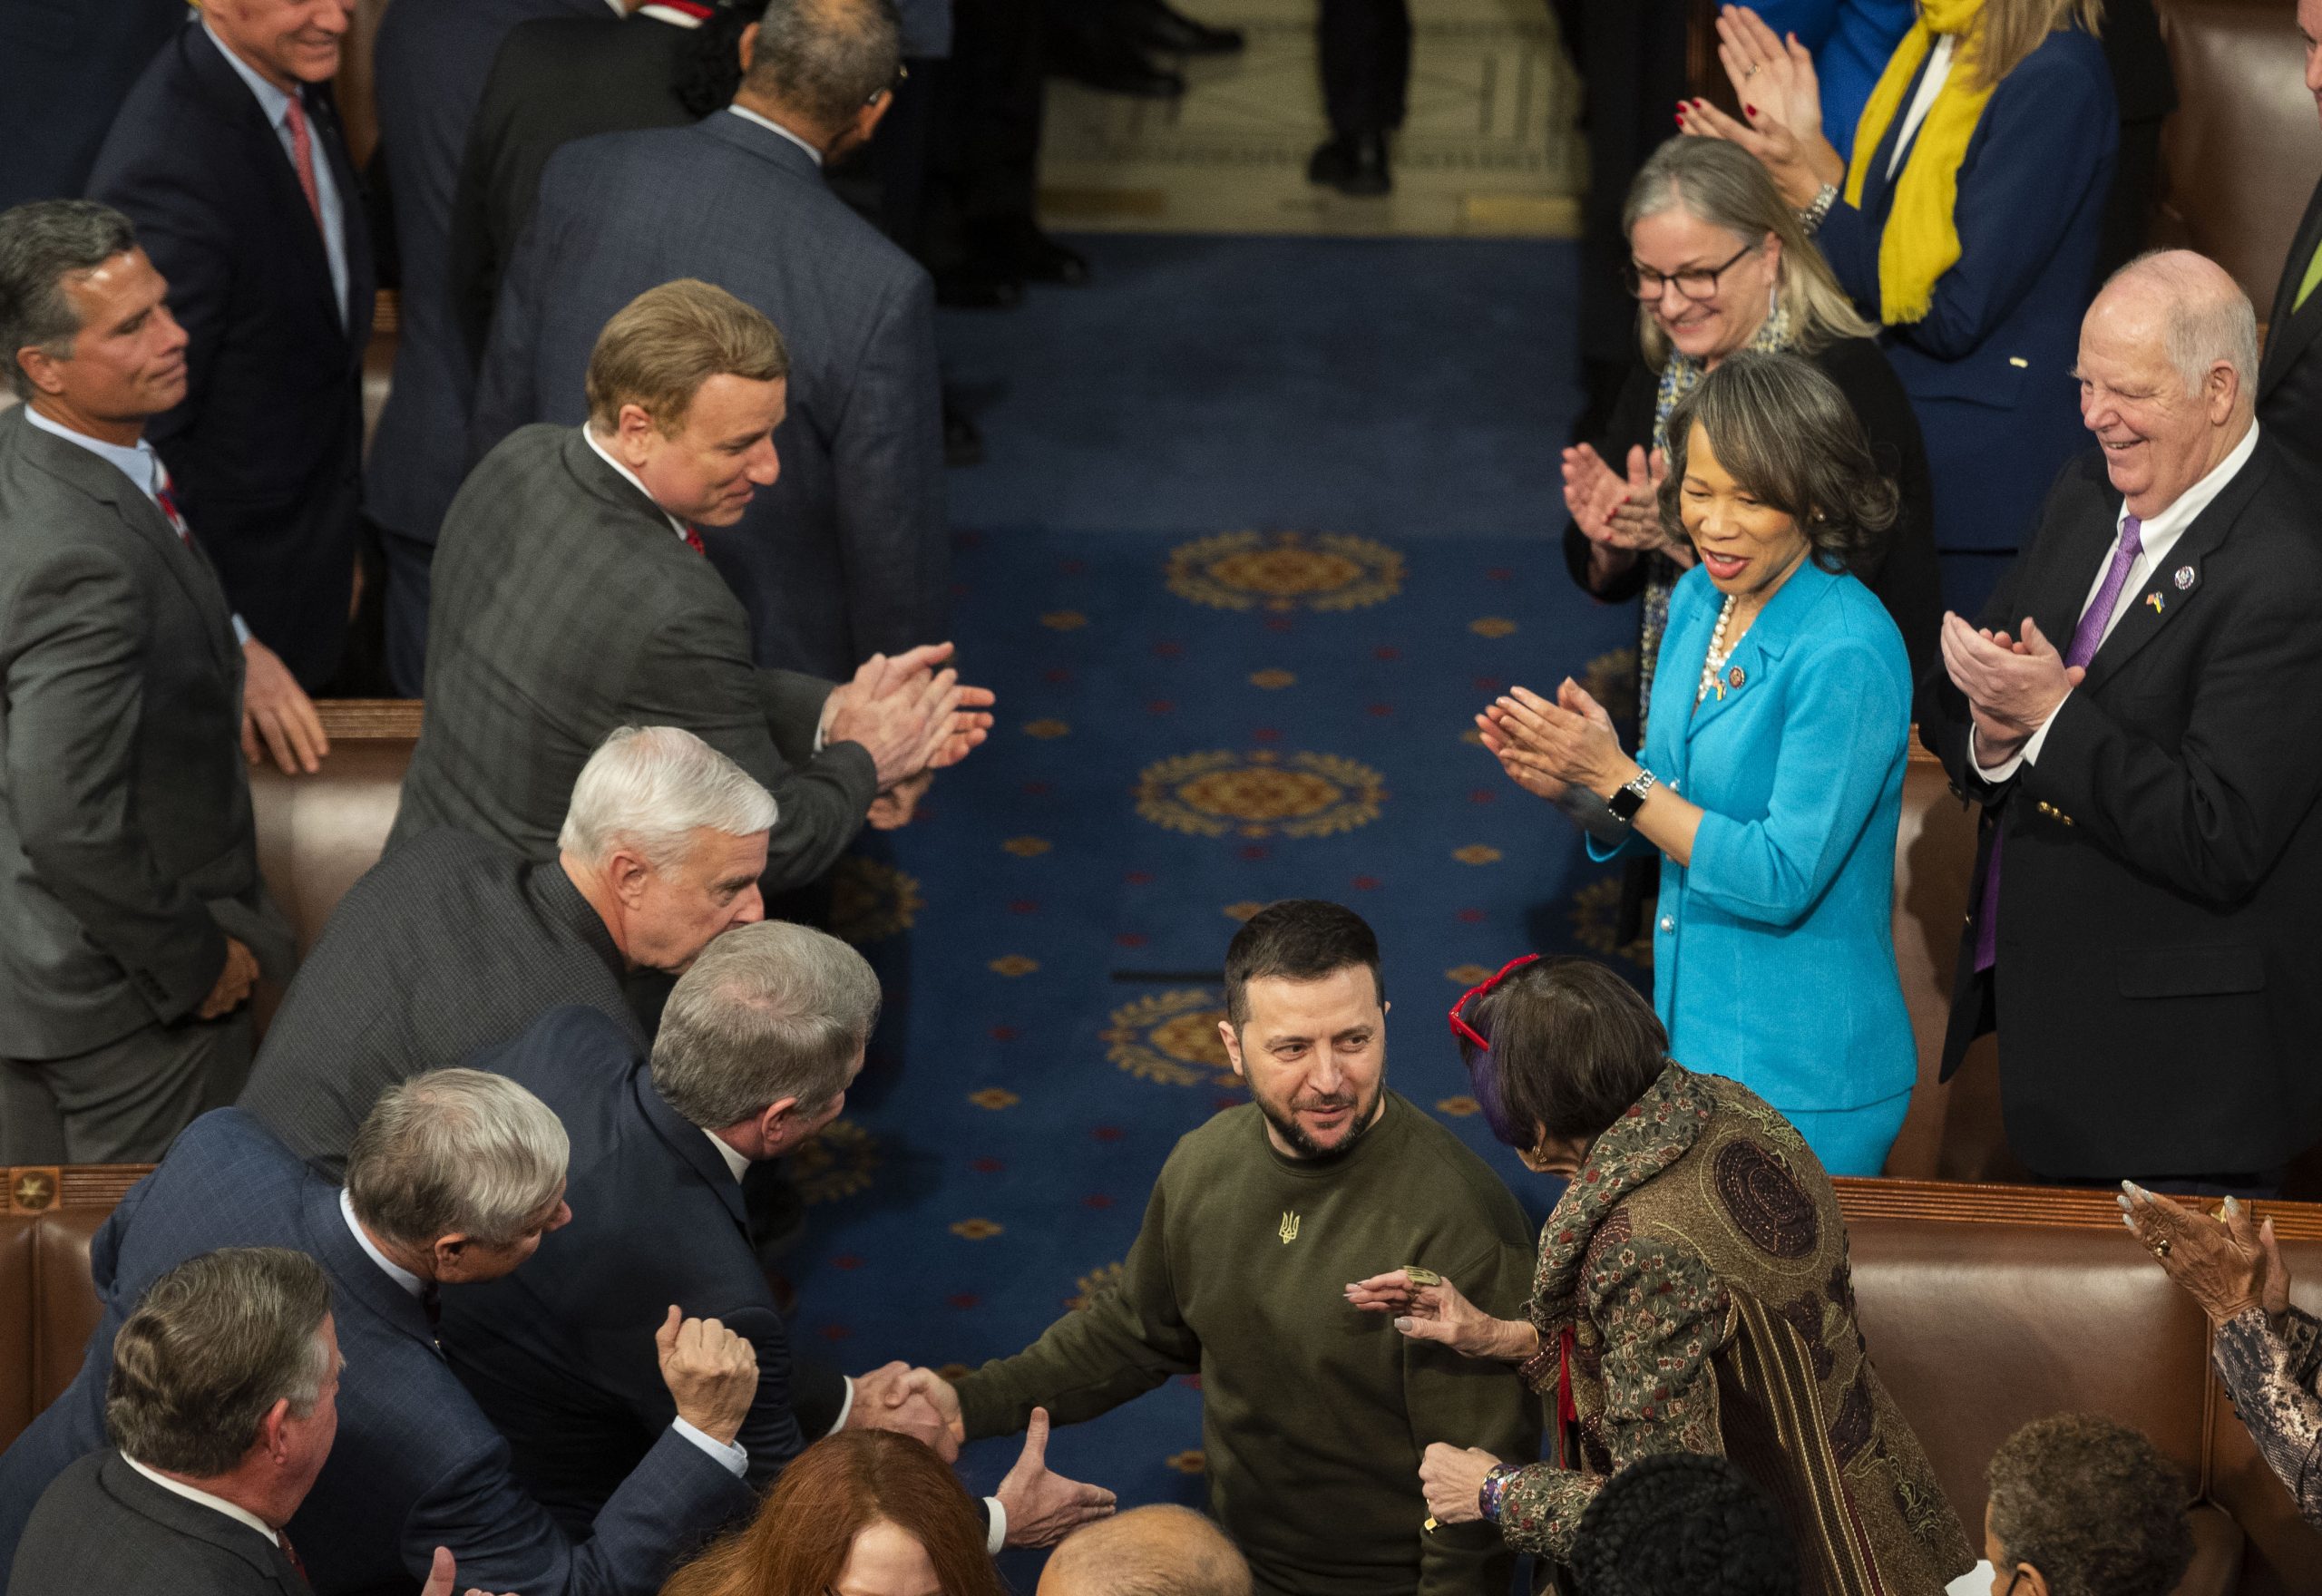 Photo: President Volodymyr Zelenskyy of Ukraine enters the United States House Chamber to address a joint session of the US Congress in the US Capitol in Washington, DC on Wednesday, December 21, 2022. Credit: Cliff Owen / CNP/Sipa USA